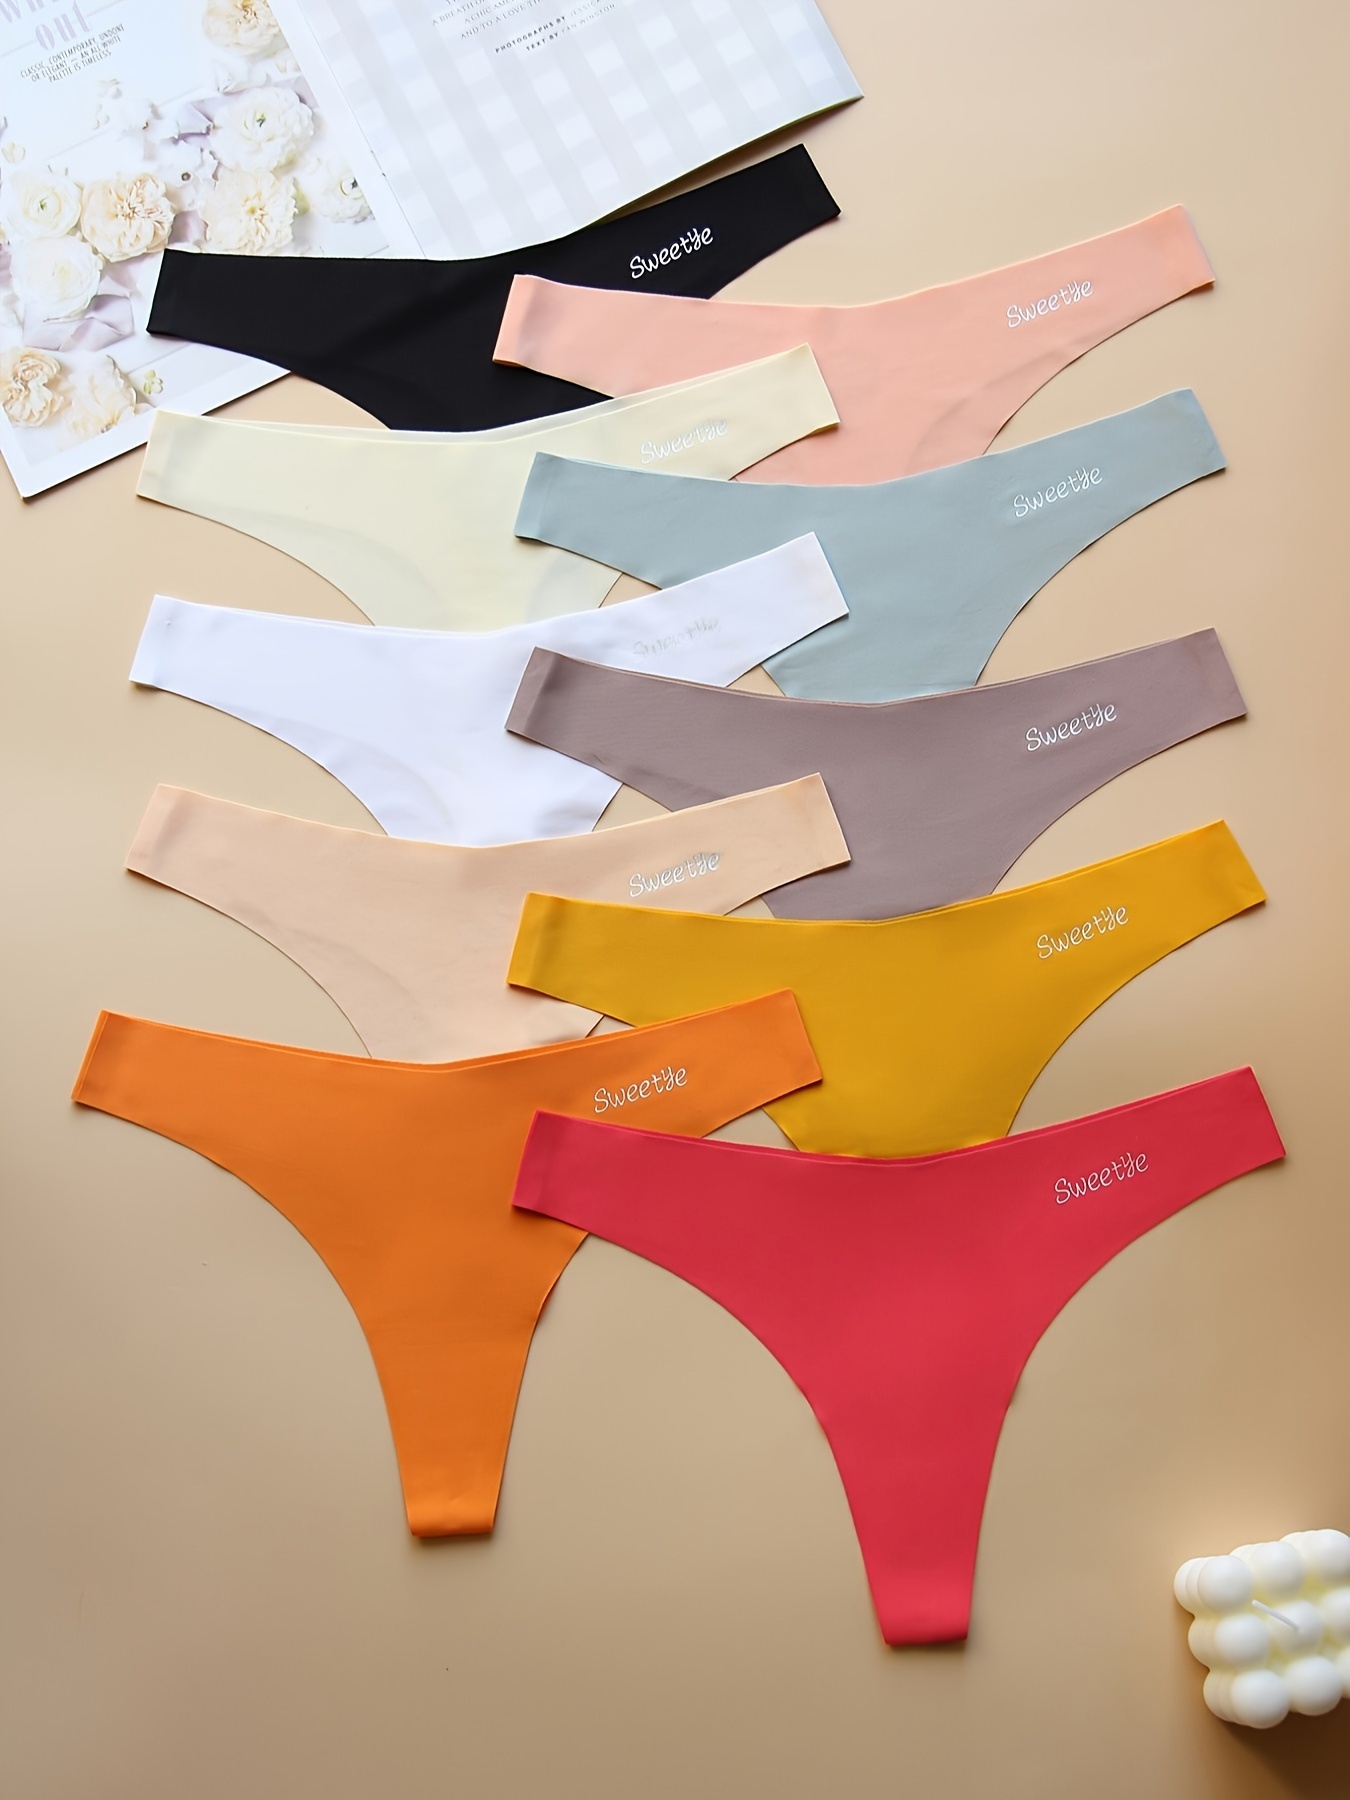 Seamless Yoga One Piece Low Waist Aunt Thong Underwear For Women For Women  Four Layer Sanitary Napkin Pants For Periods From Vanilla12, $11.49